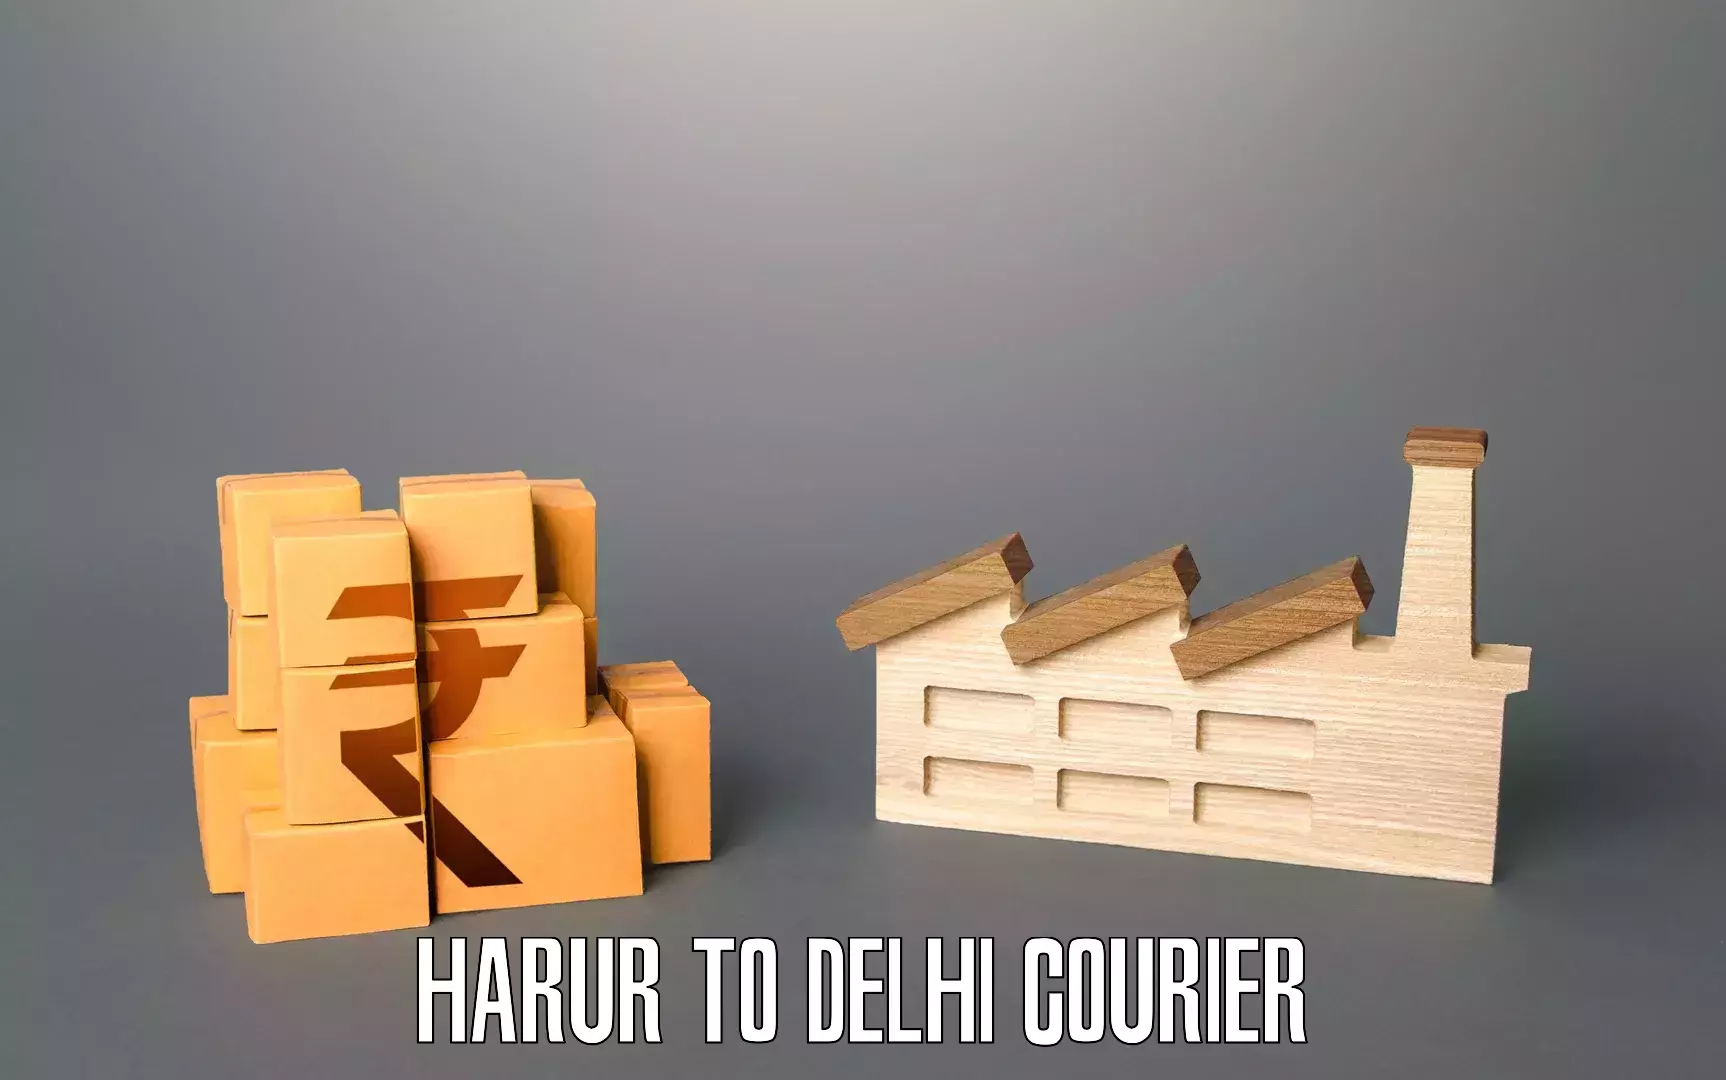 Expert goods movers Harur to Lodhi Road